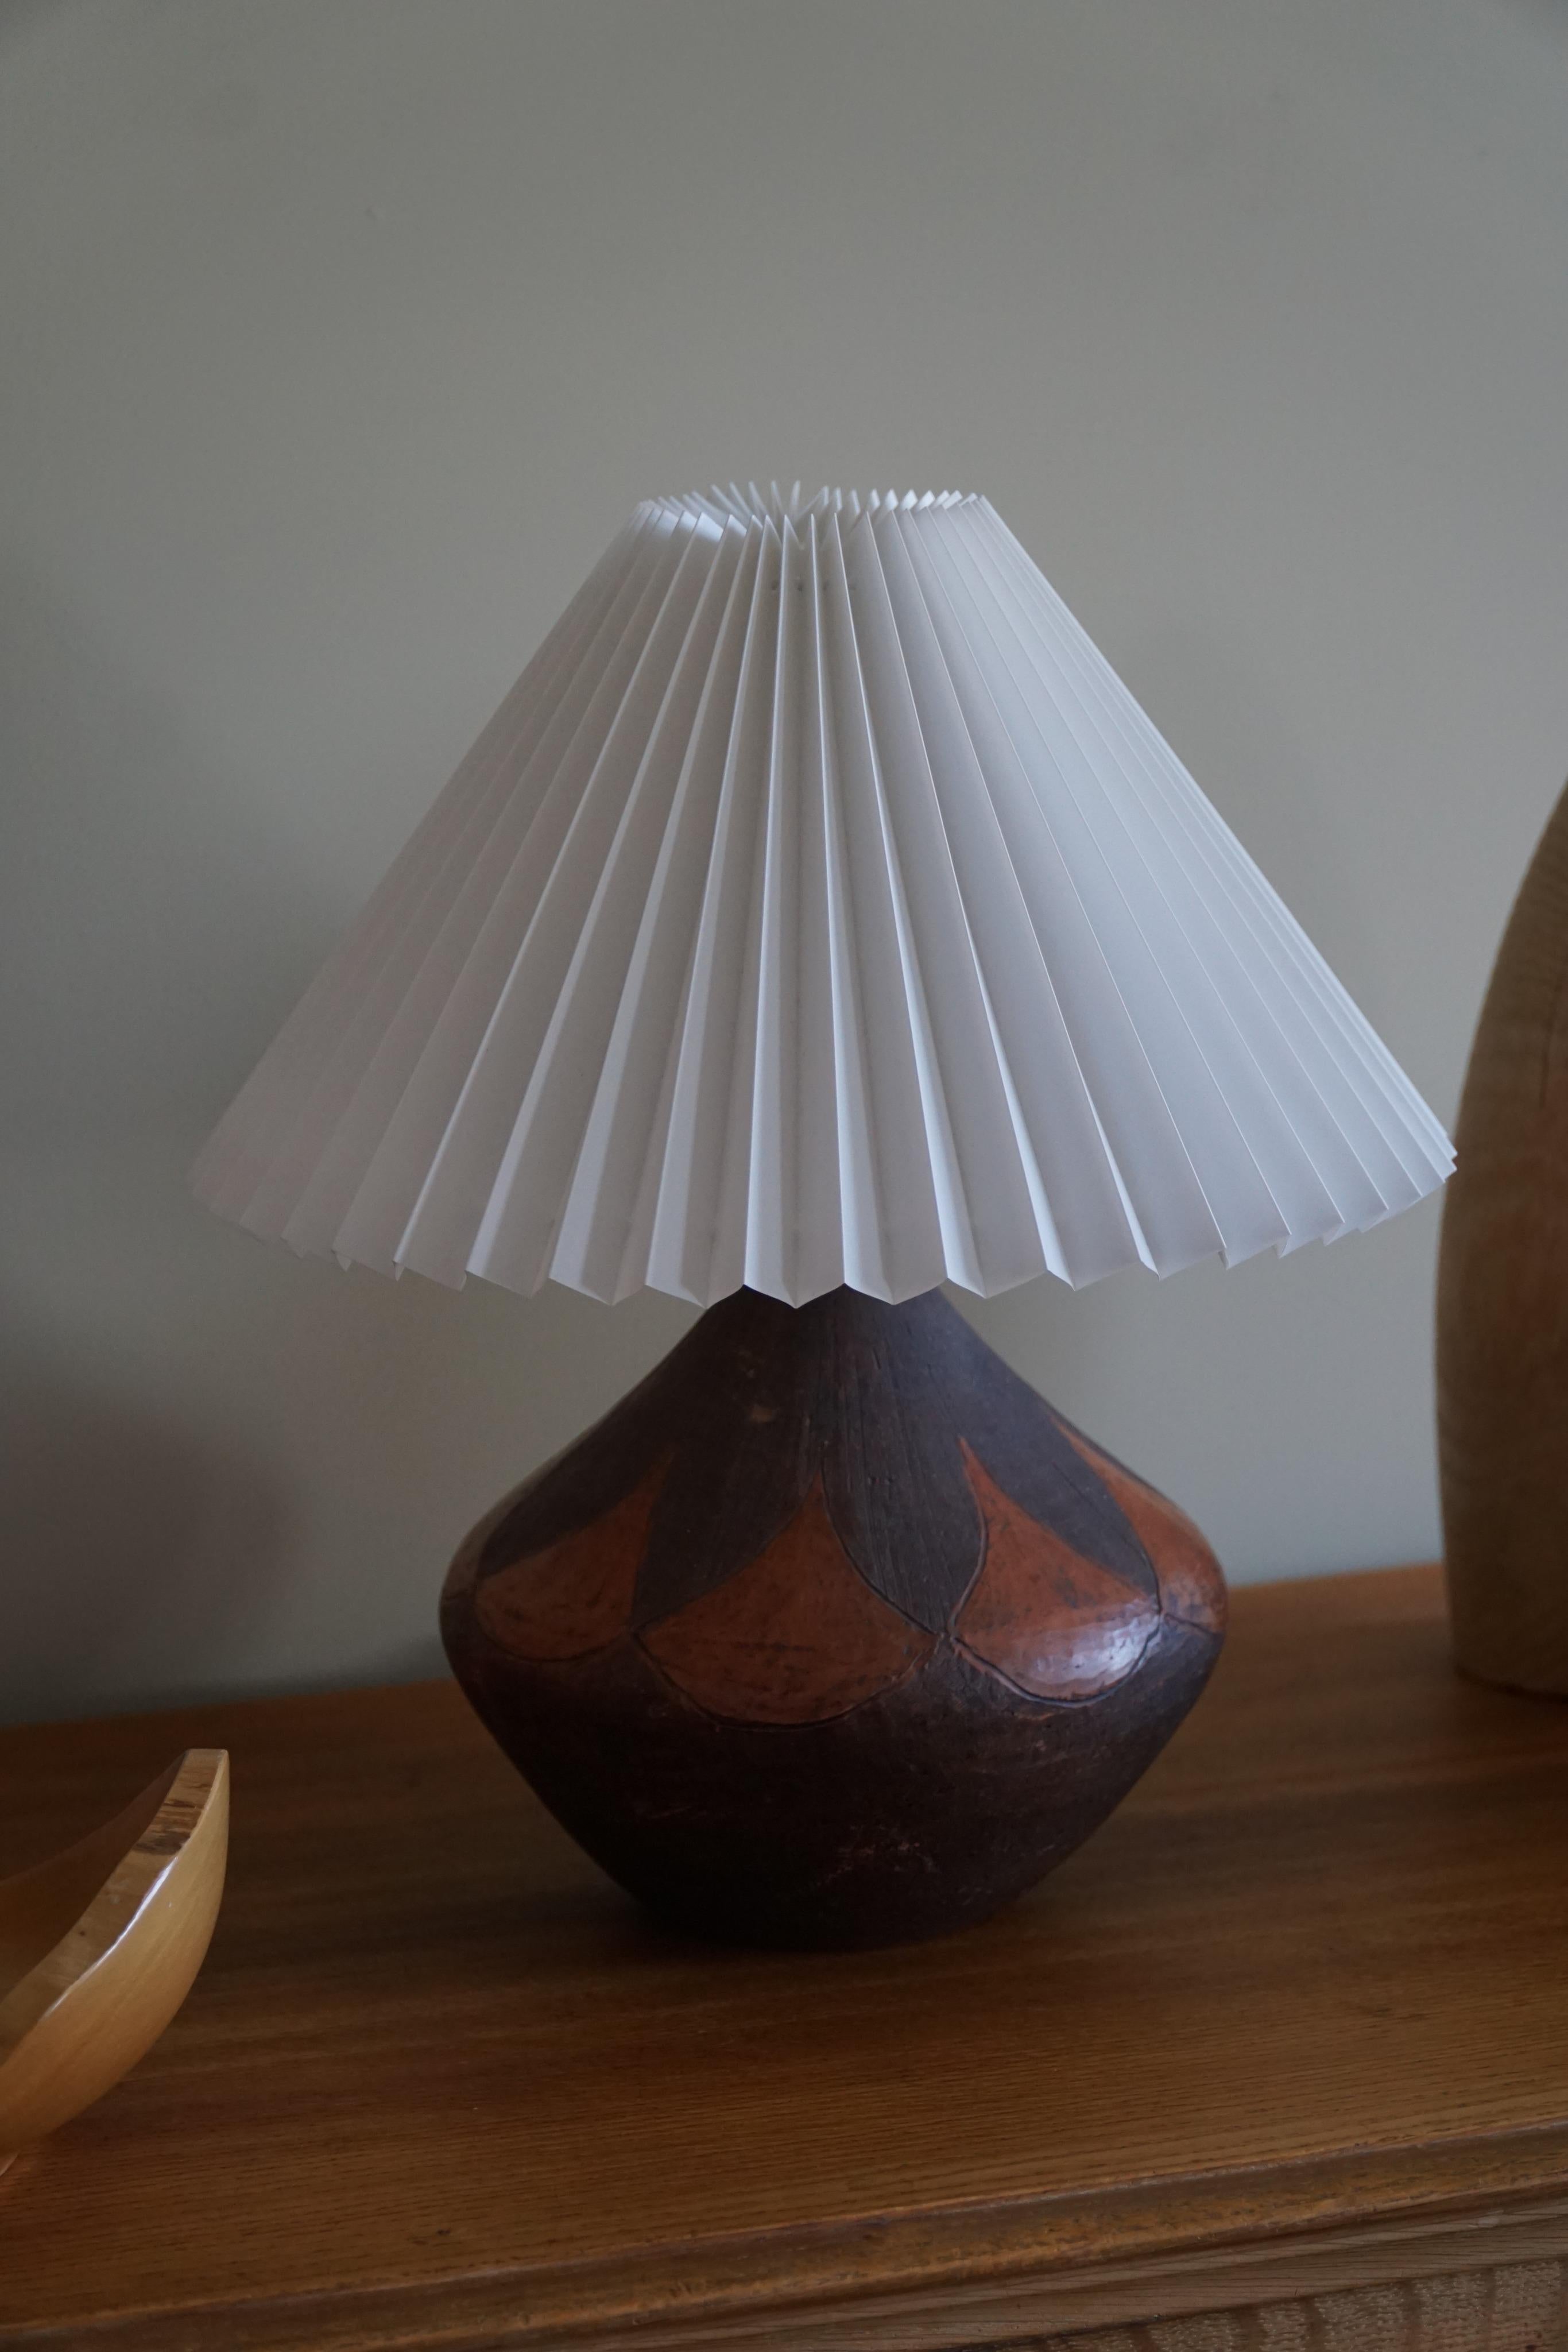 Danish Midcentury Round Ceramic Table Lamp, Earthen Colors, 1950s For Sale 4